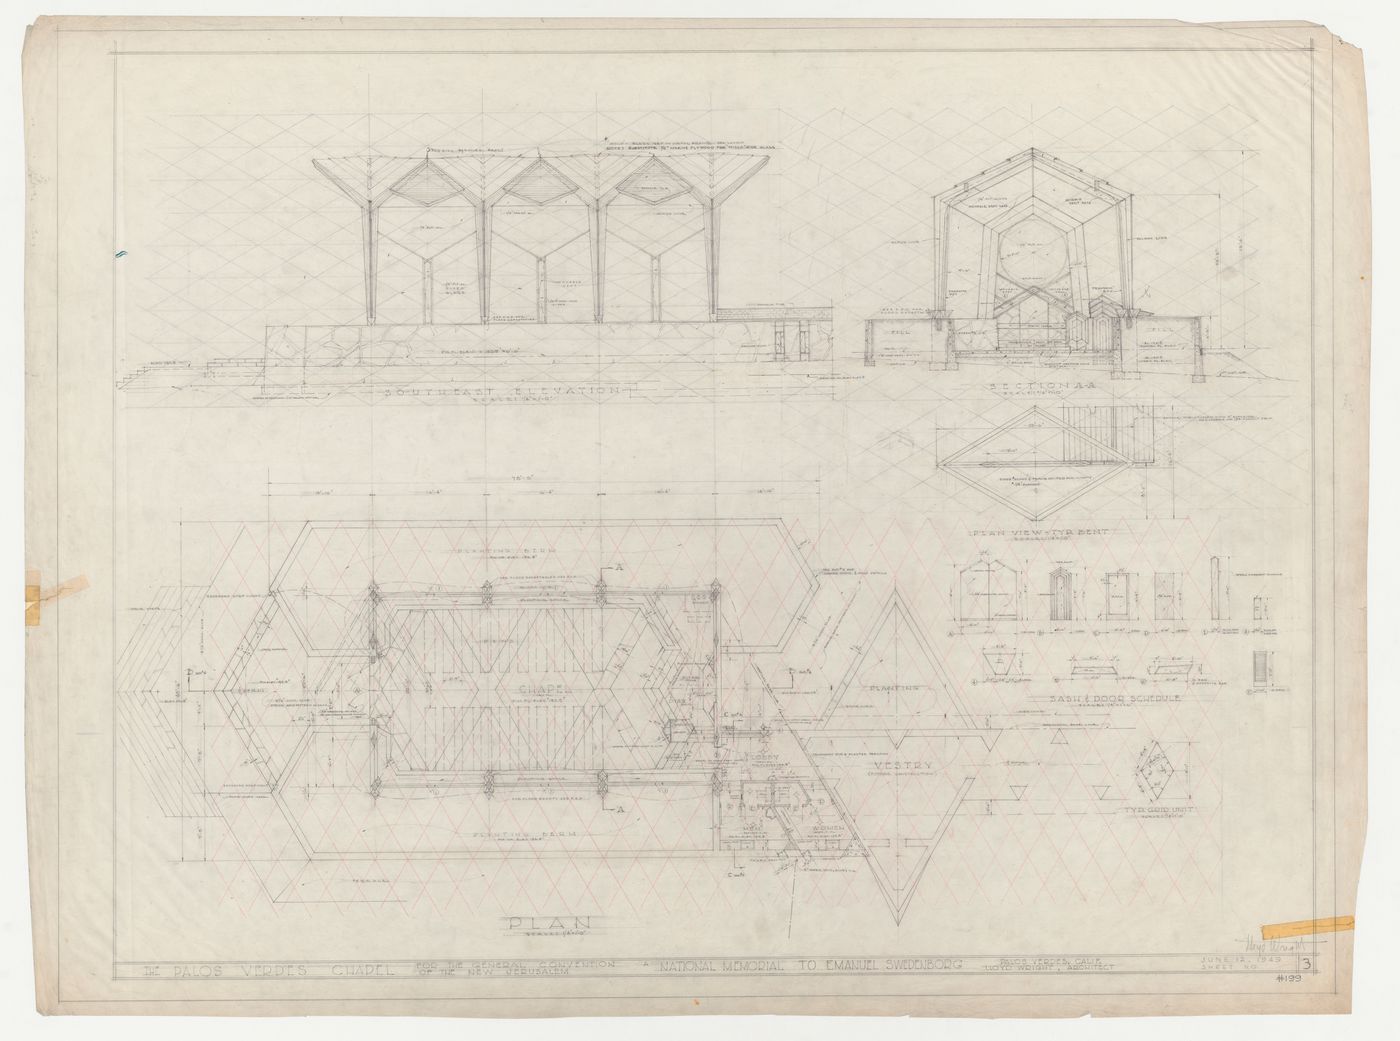 Wayfarers' Chapel, Palos Verdes, California: Plan, southeast elevation and section with sash and door schedule and plan for redwood bent truss developed on an equilateral parallelogram grid